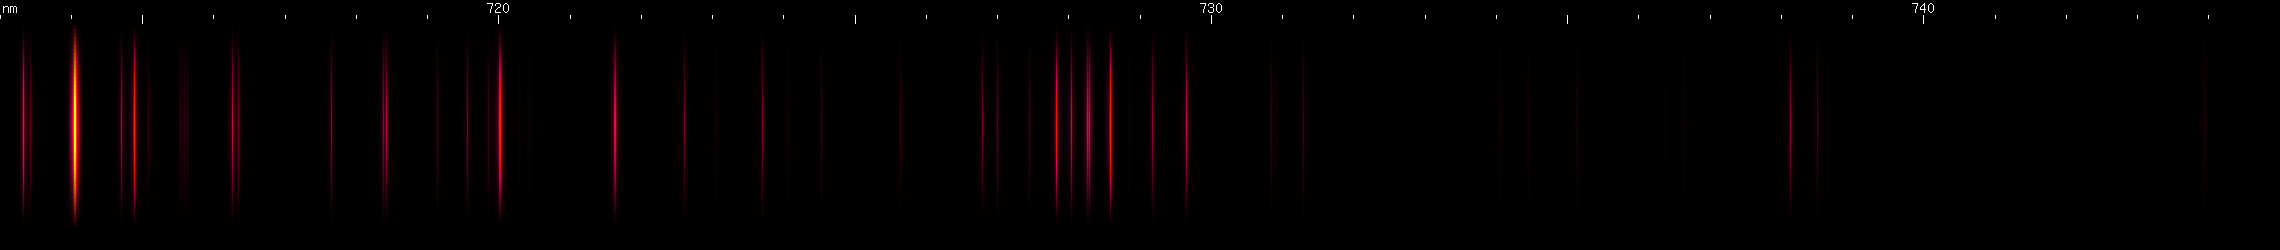 Spectral lines of Tungsten.